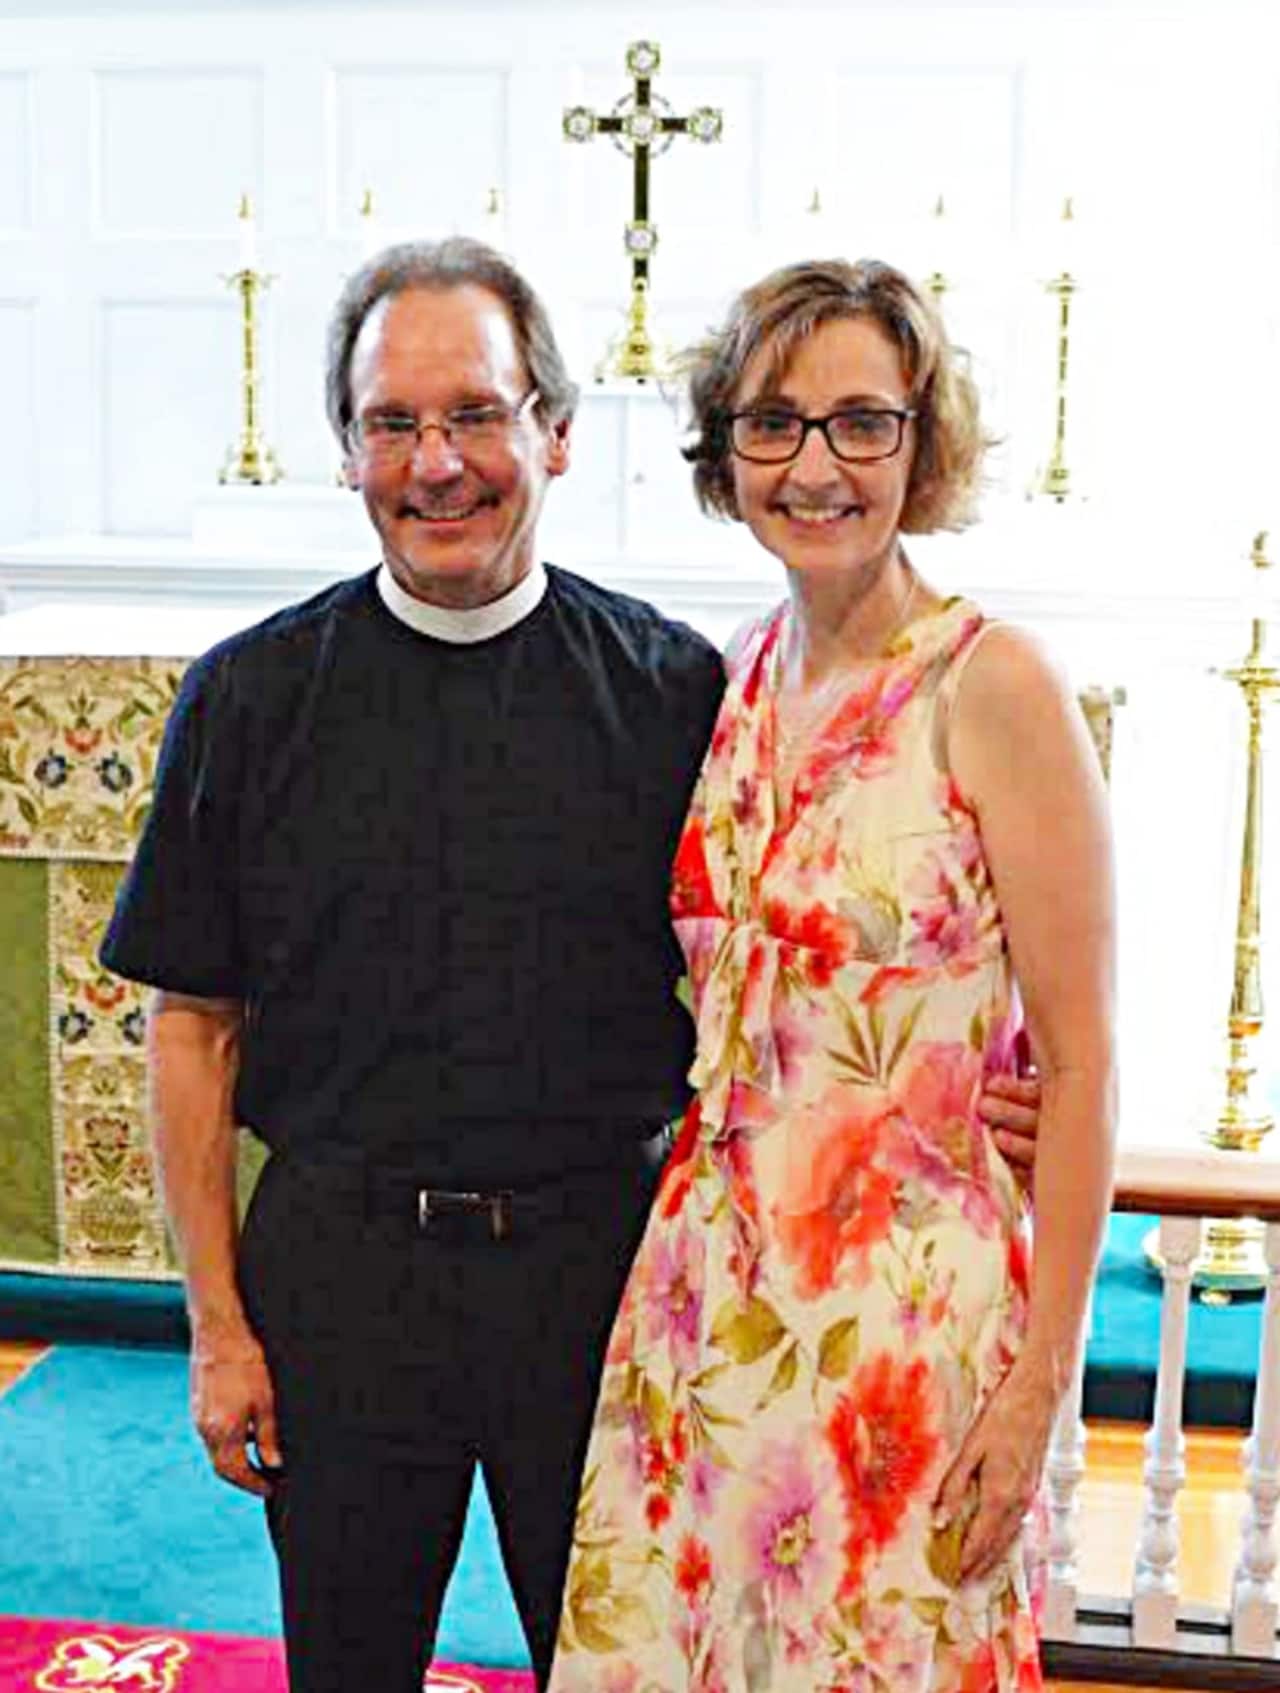 Rev. Dr. Derrick Fallon and his wife Pam are joining St. Michael's Lutheran Church, in New Canaan.